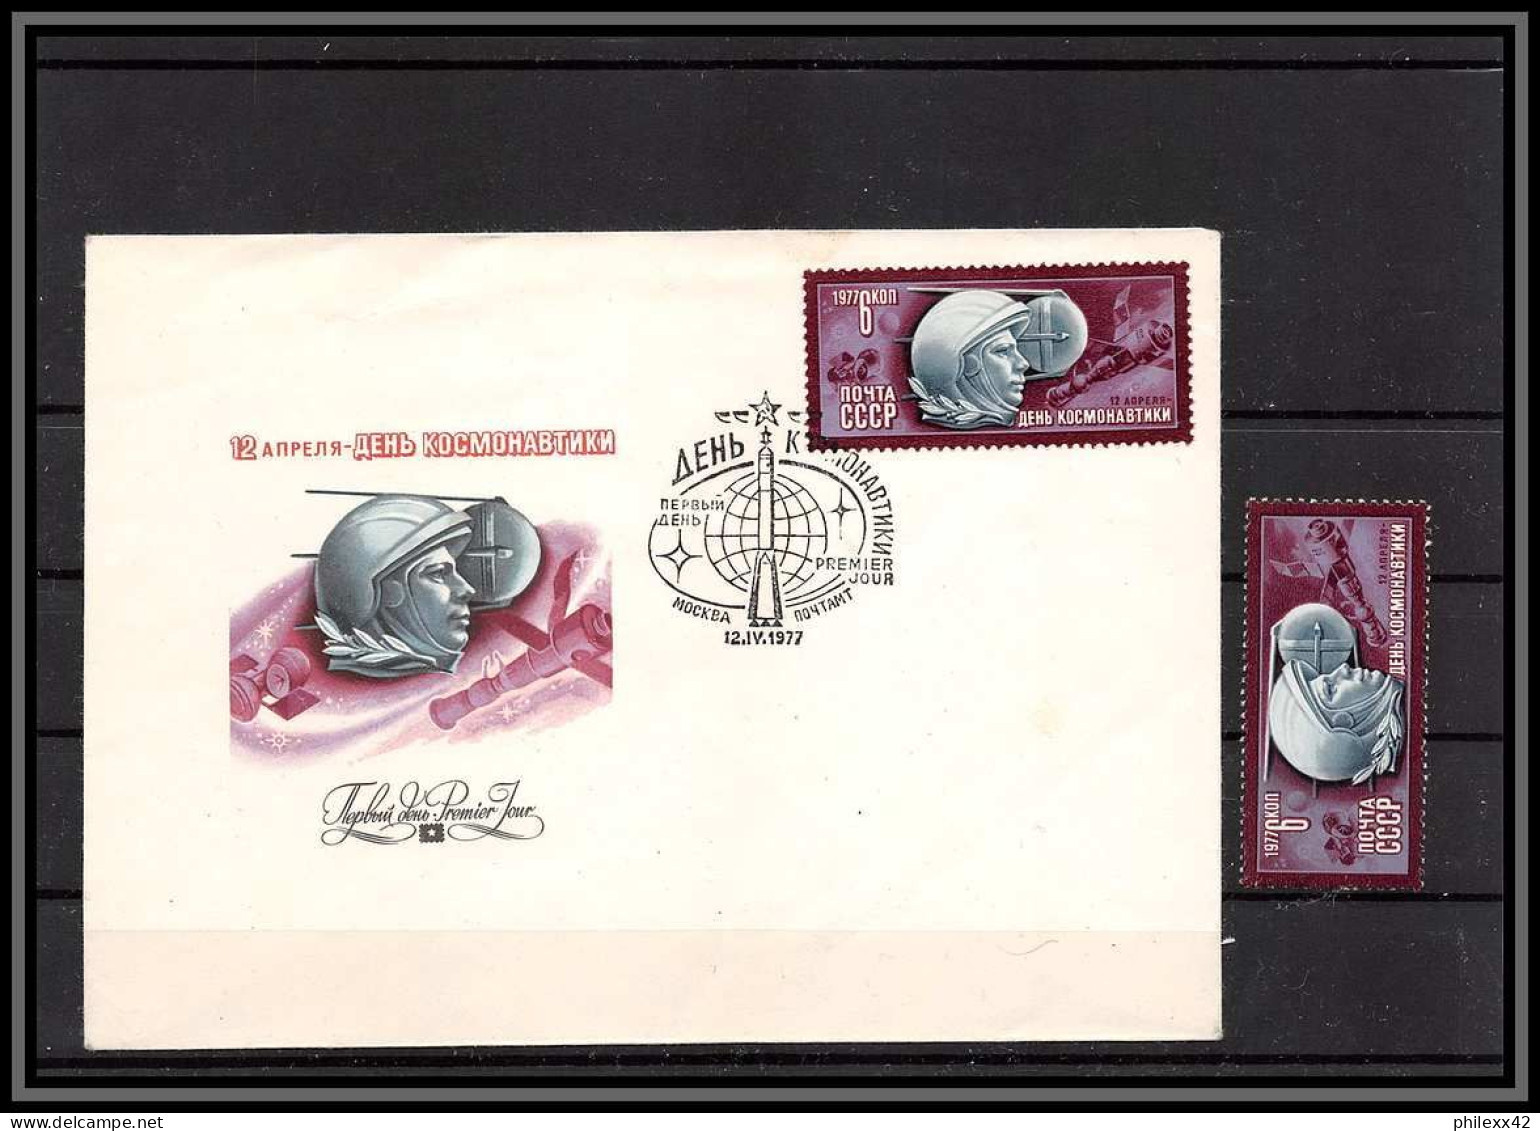 3391 Espace (space) Lettre (cover) Russie (Russia Urss USSR) 4363 Fdc + Mnh ** Cosmonauts Day Gagarine Gagarin 12/4/1977 - Russia & USSR